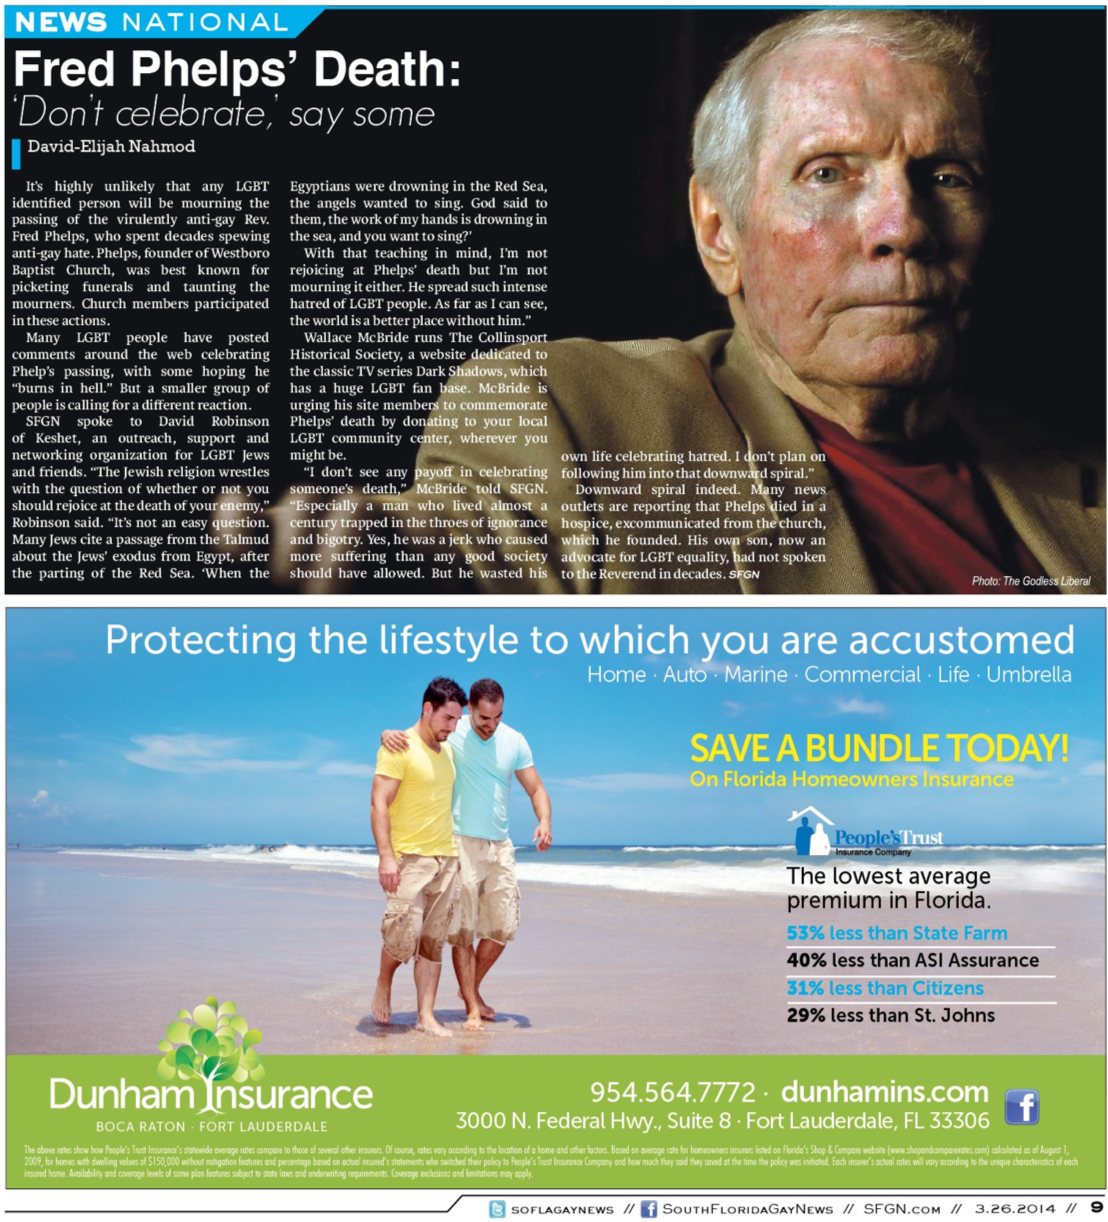 Image of an article with the title "Fred Phelps' Death: 'Don't celebrate,' say some"